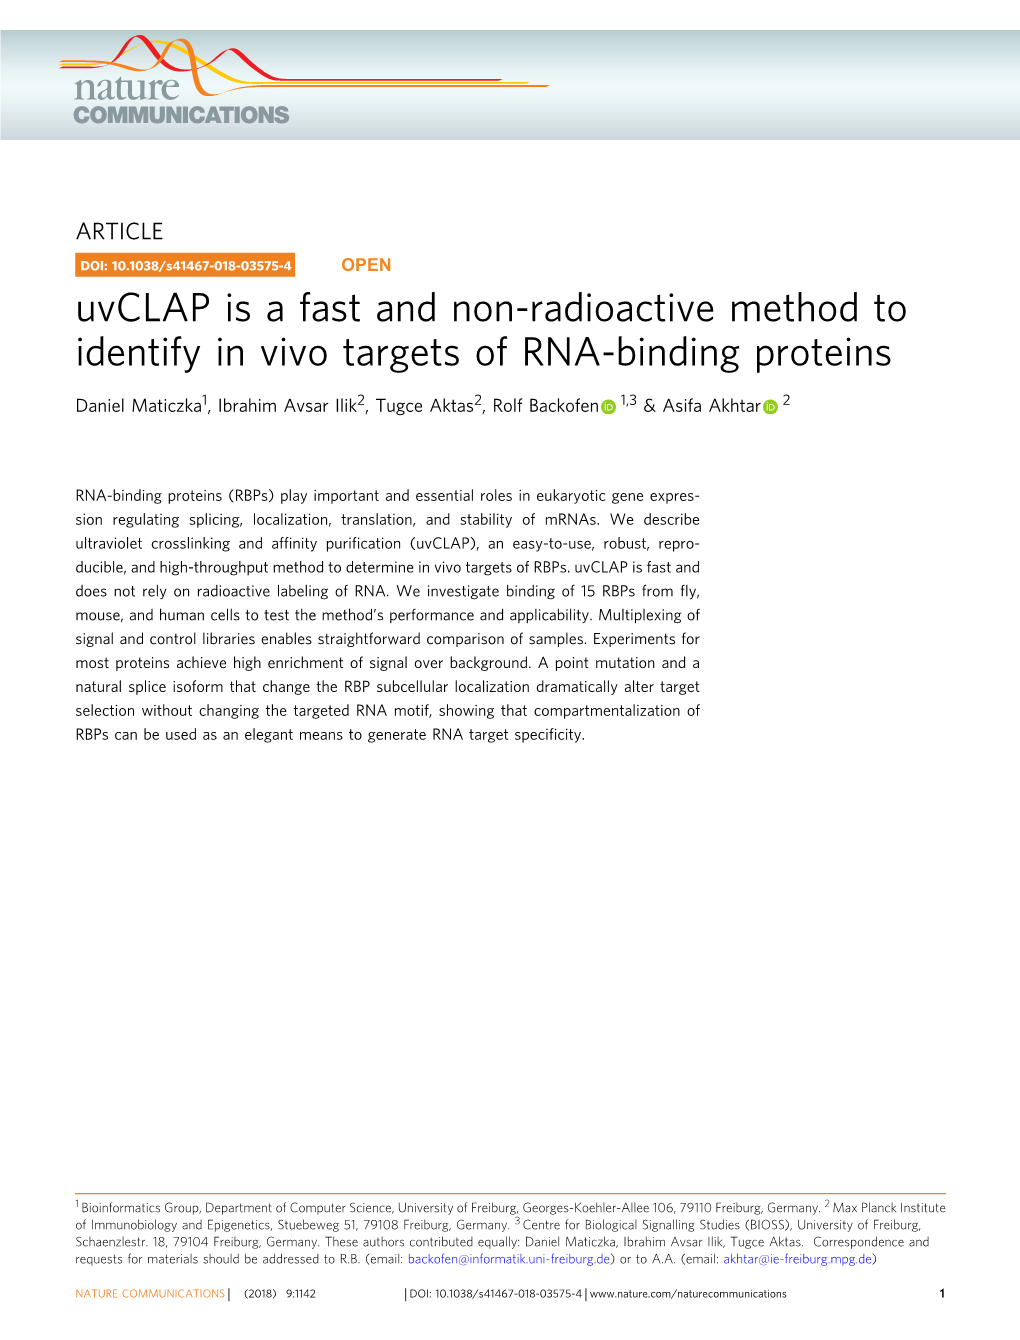 Uvclap Is a Fast and Non-Radioactive Method to Identify in Vivo Targets of RNA-Binding Proteins